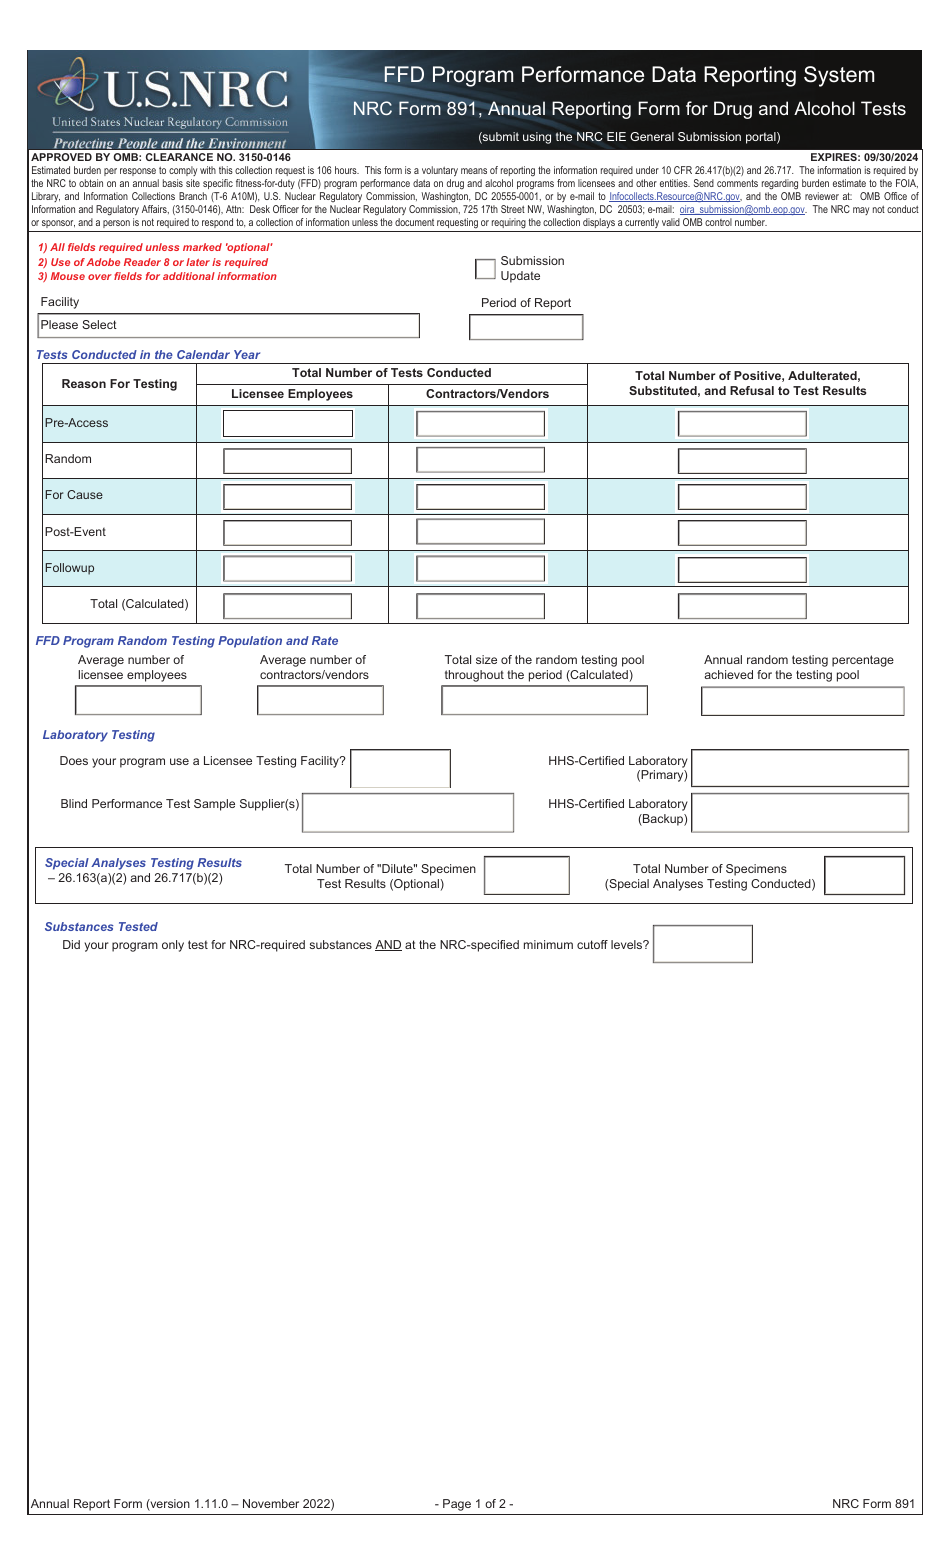 NRC Form 891 Annual Reporting Form for Drug and Alcohol Tests - Ffd Program Performance Data Reporting System, Page 1